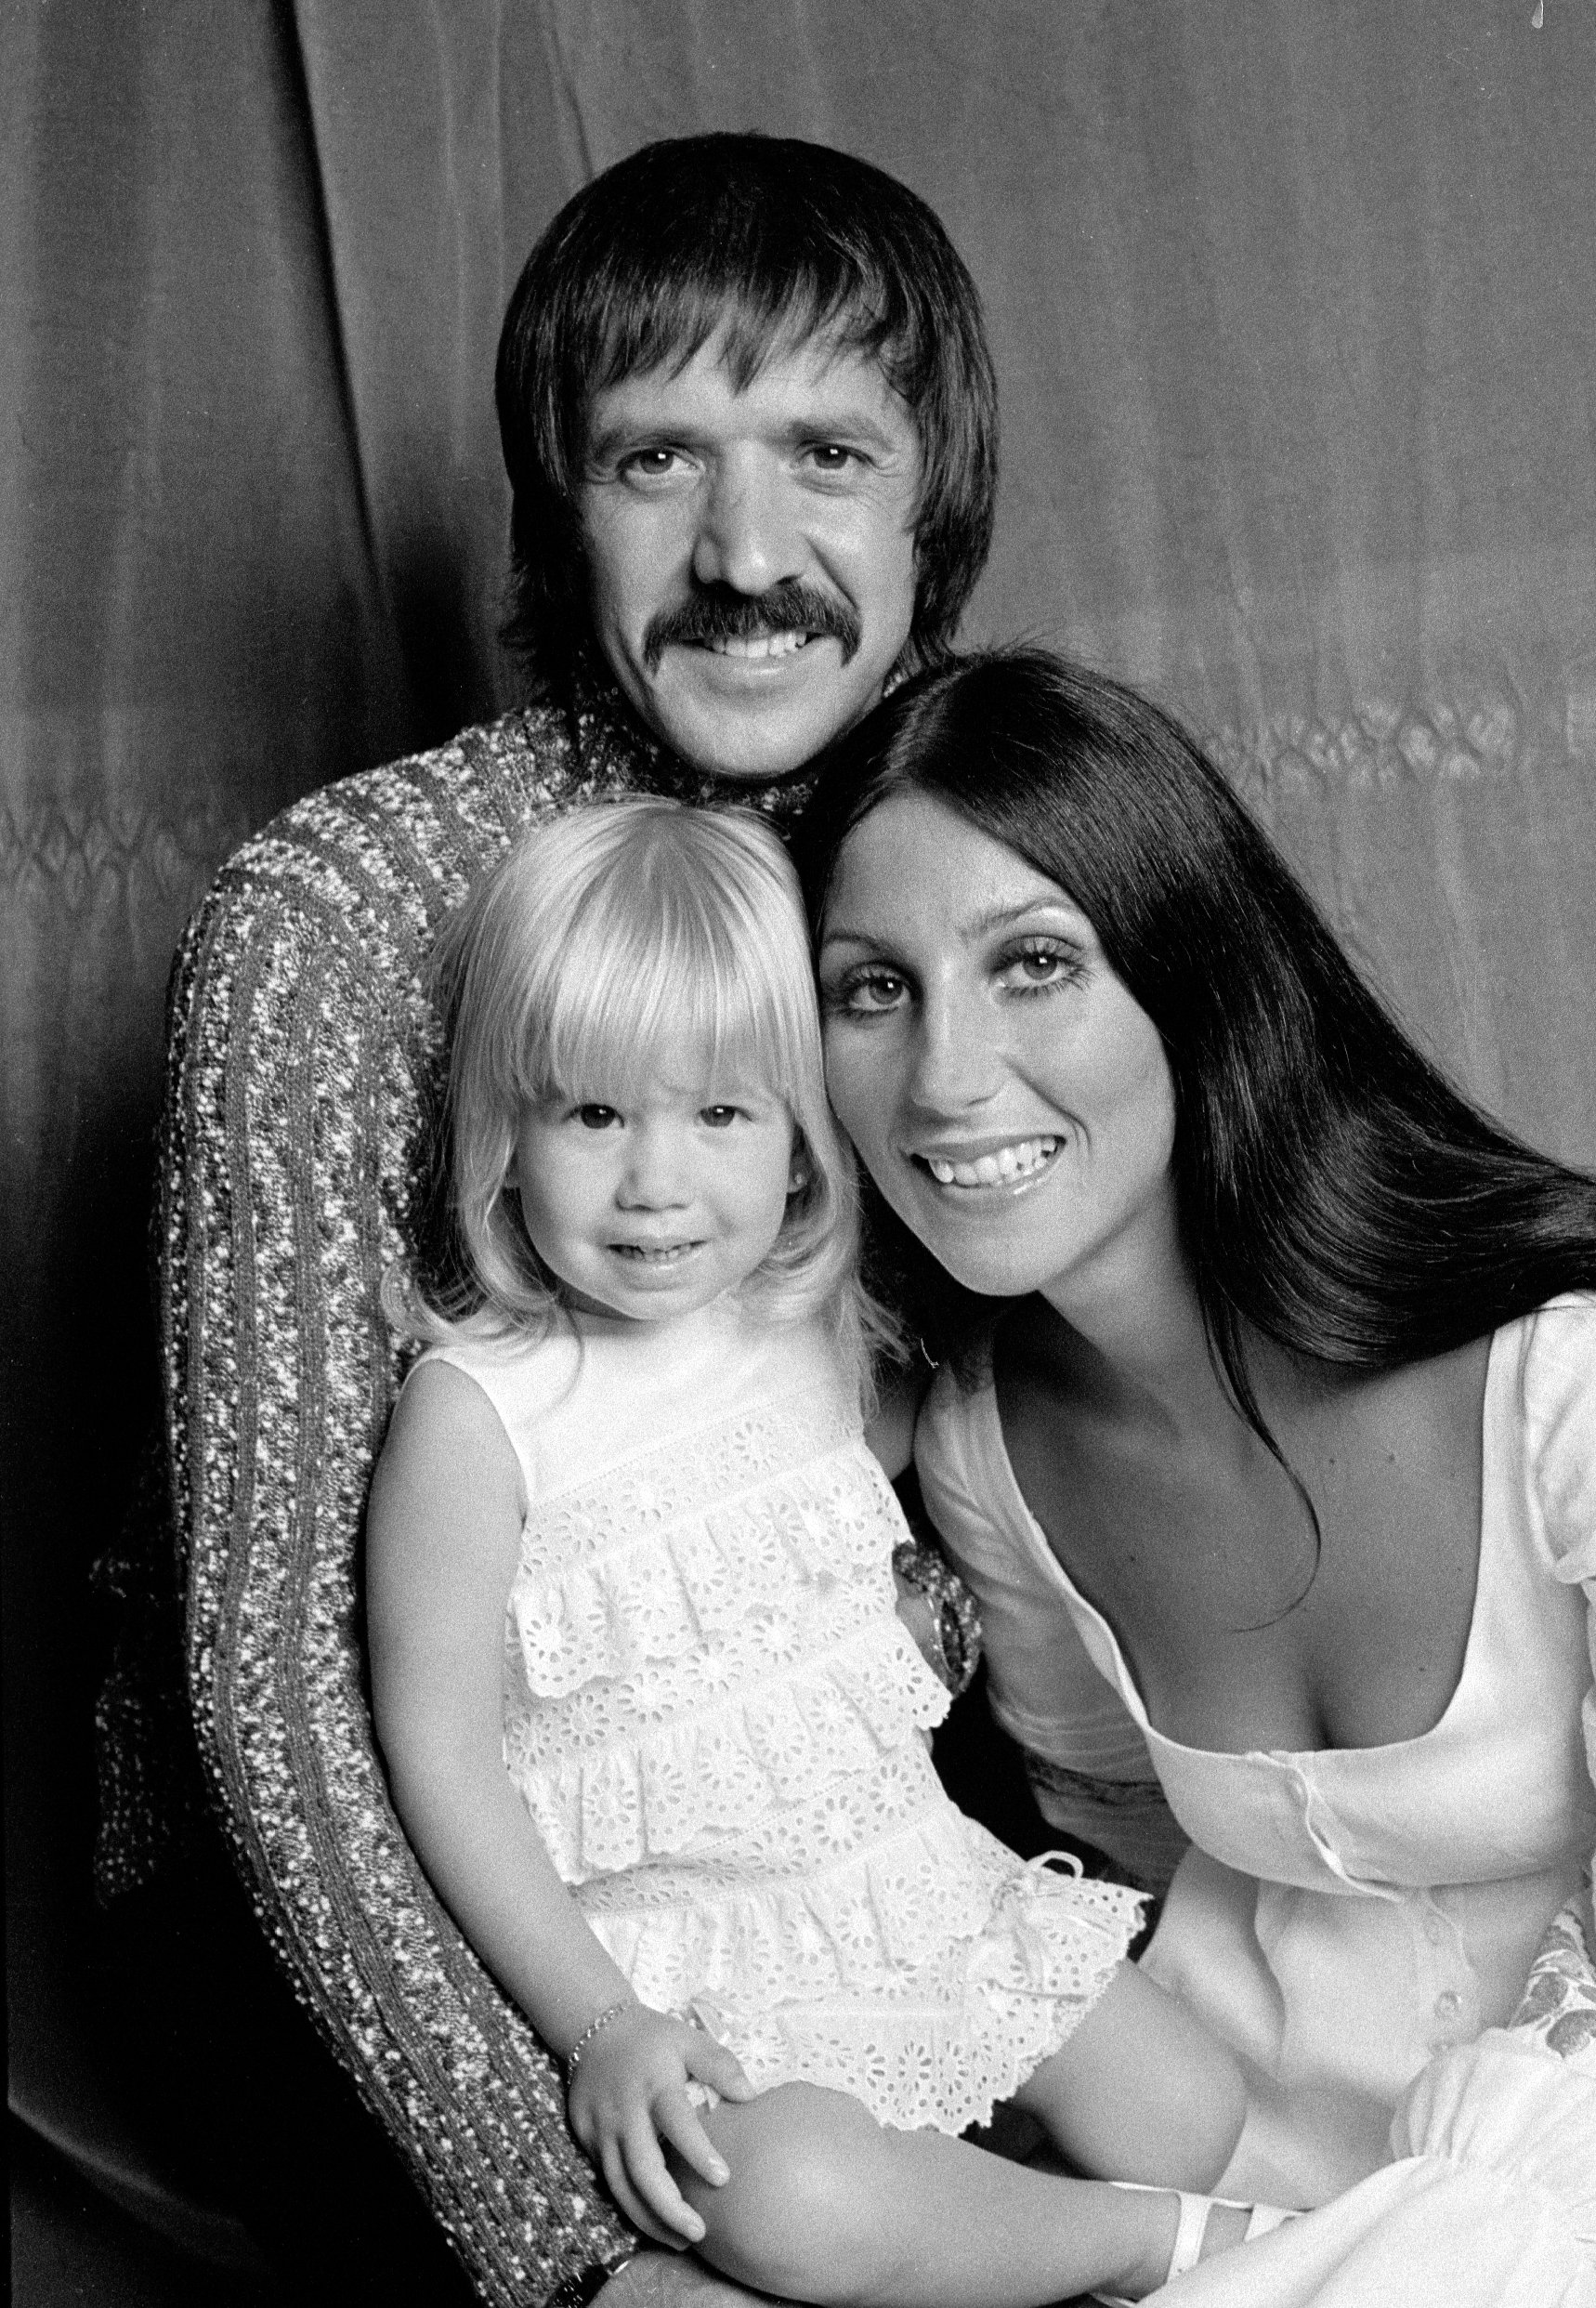 Singers Sonny Bono and Cher pose with their daughter Chastity Bono for the TV variety show 'The Sonny and Cher Comedy Hour', July 1, 1971. |  Source: Getty Images